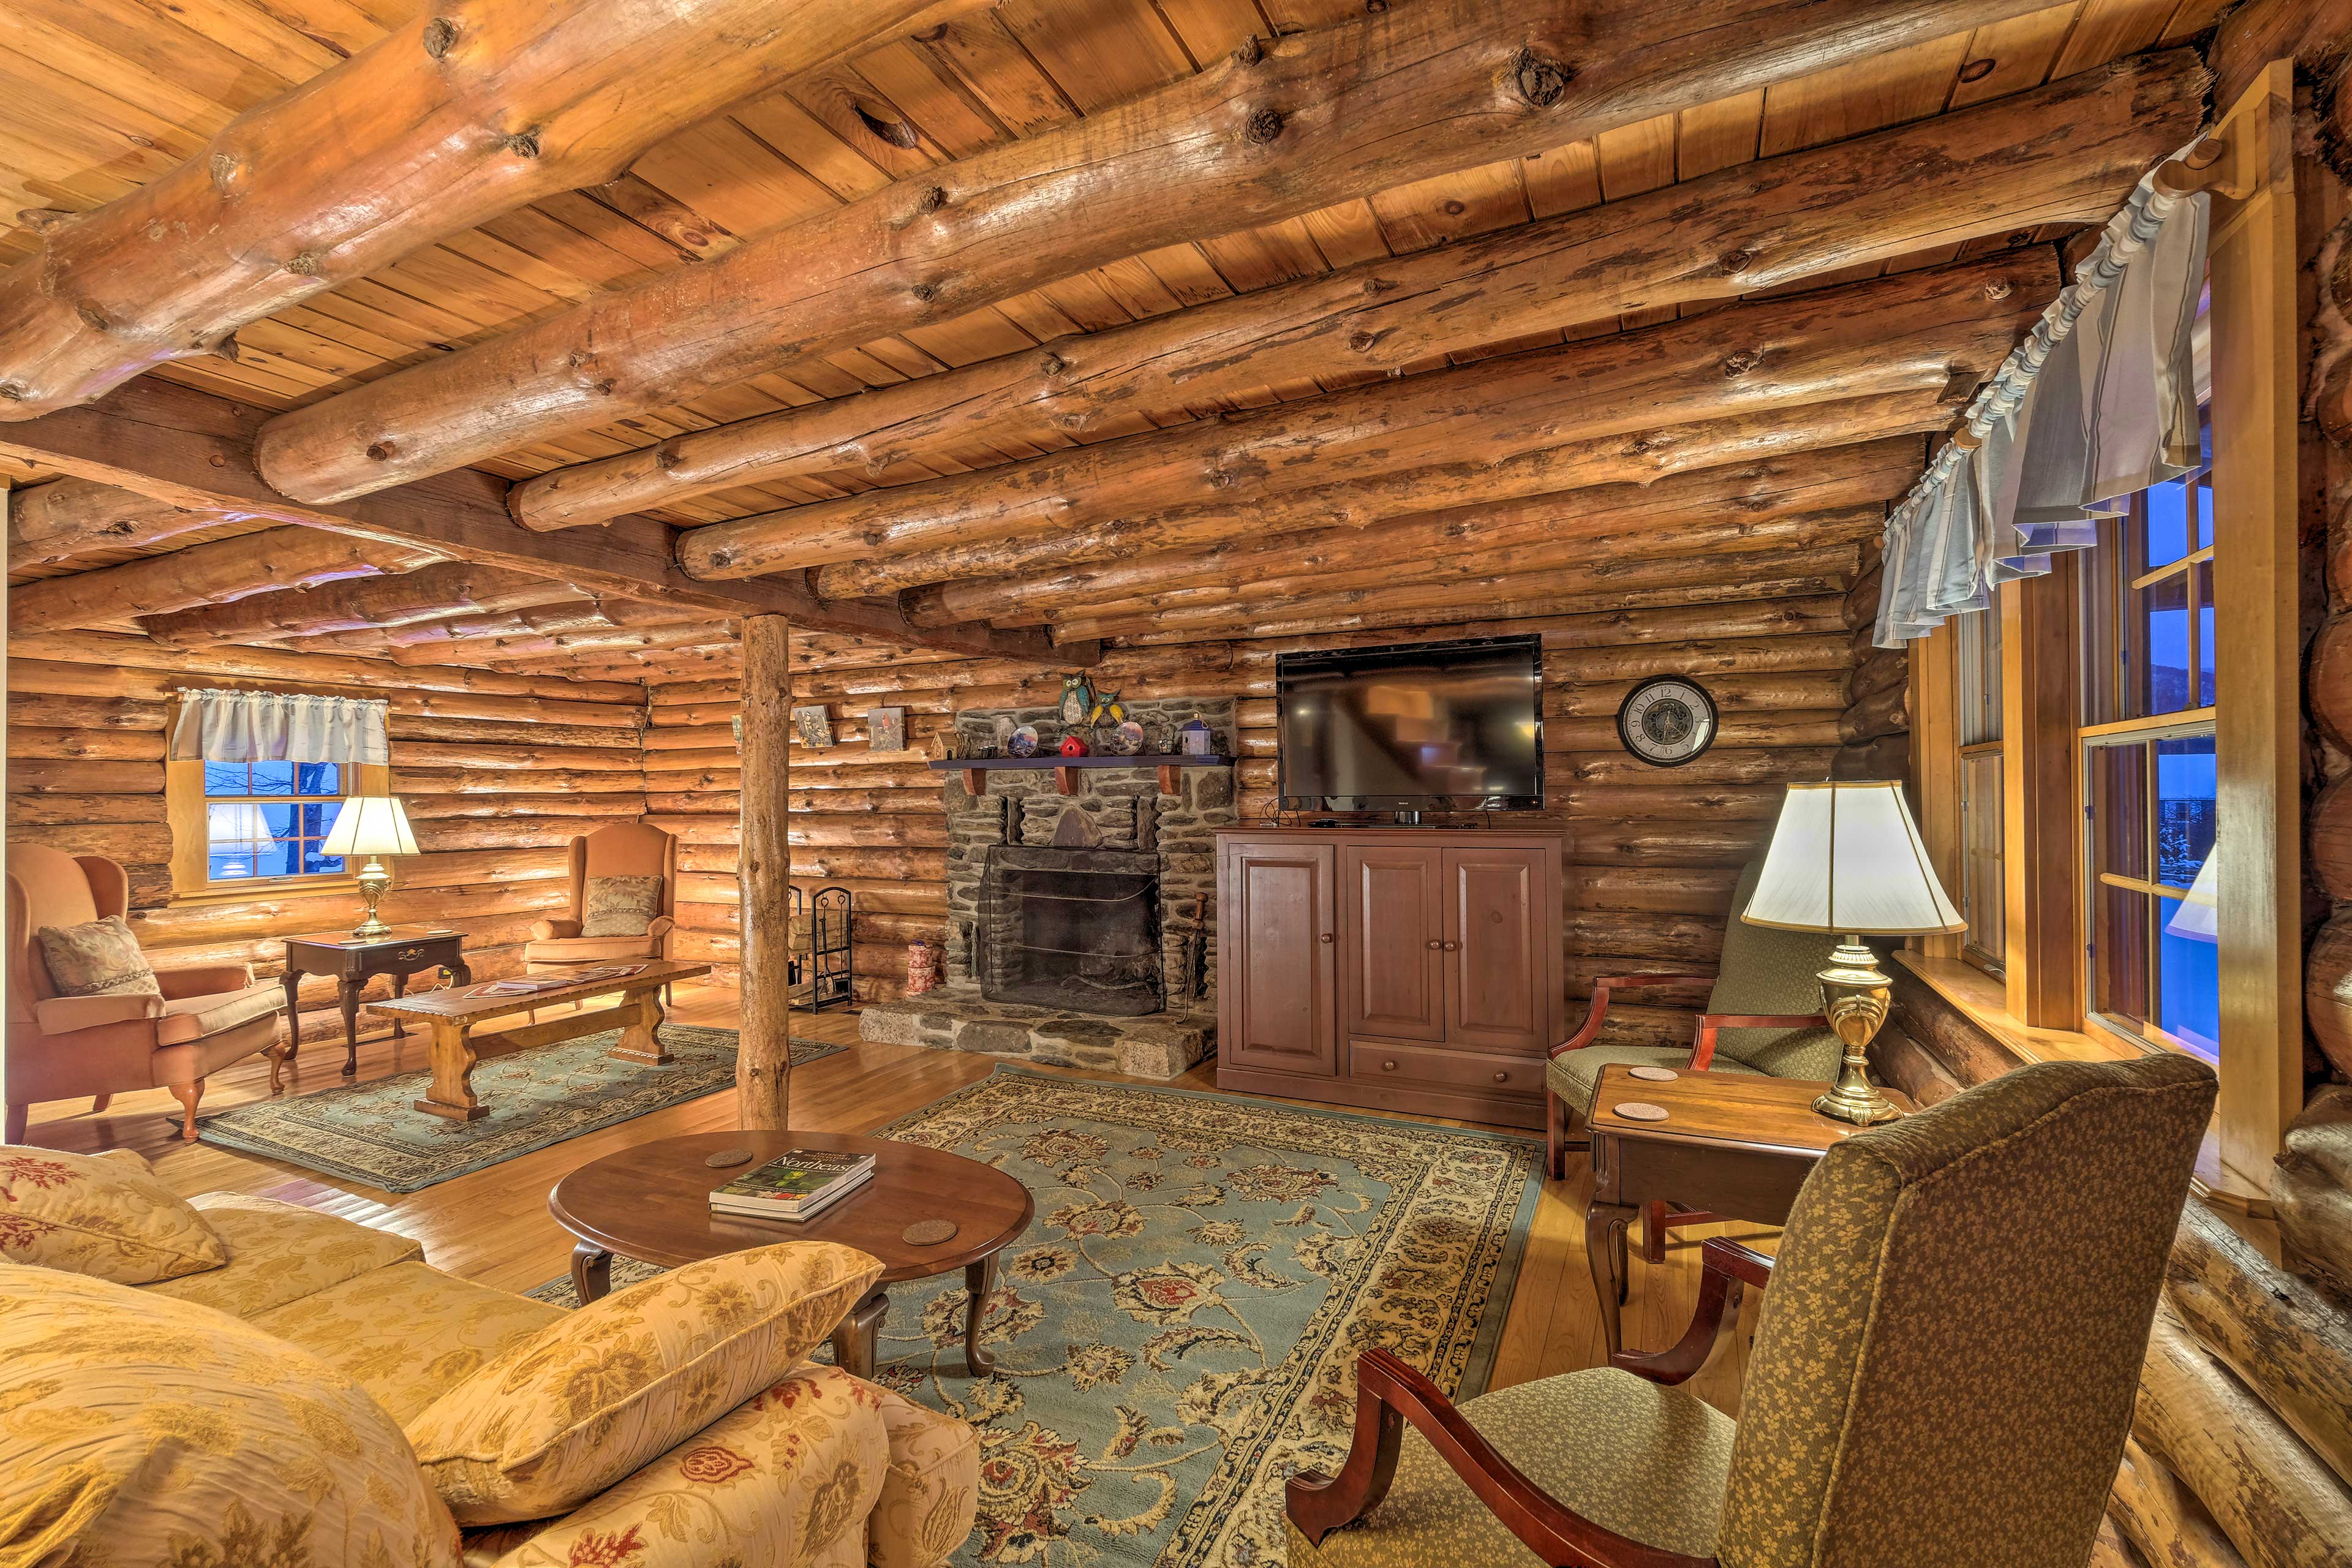 After a day outdoors, cuddle up in front of the fireplace and flat-screen TV.